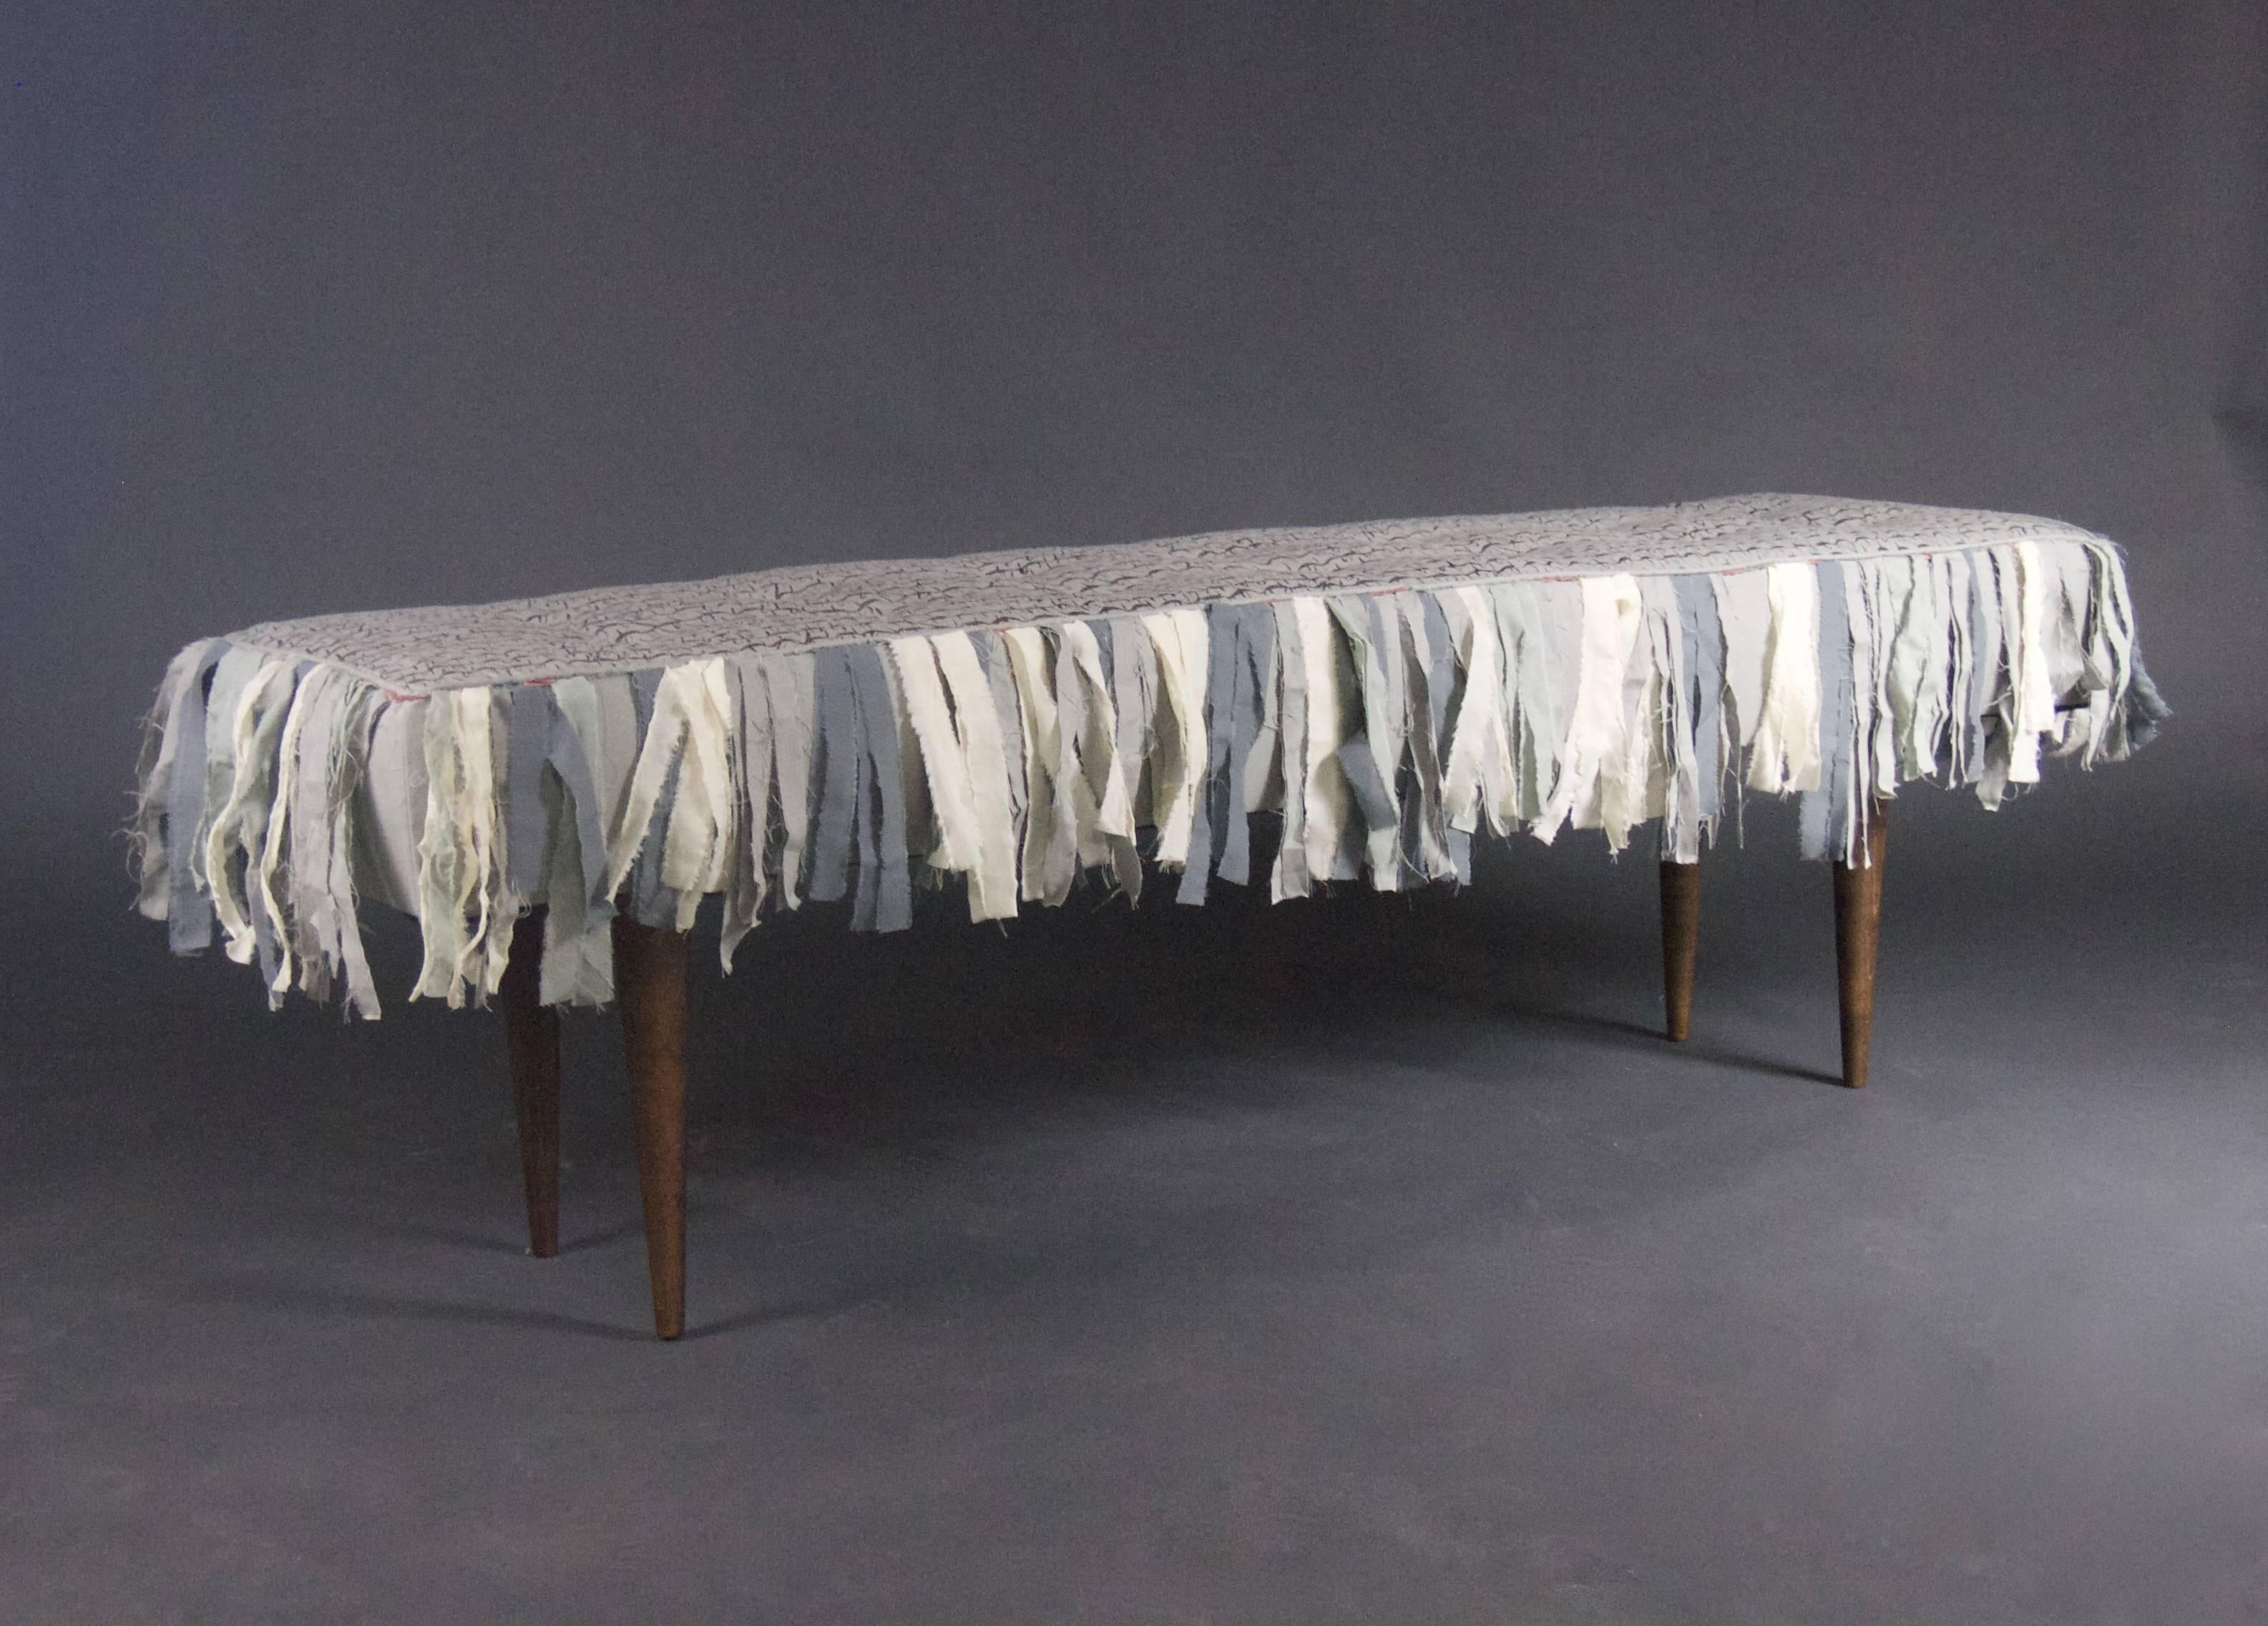 Contemporary Handmade Bench with Hand-Painted Textile and Handmade Cotton Fringe